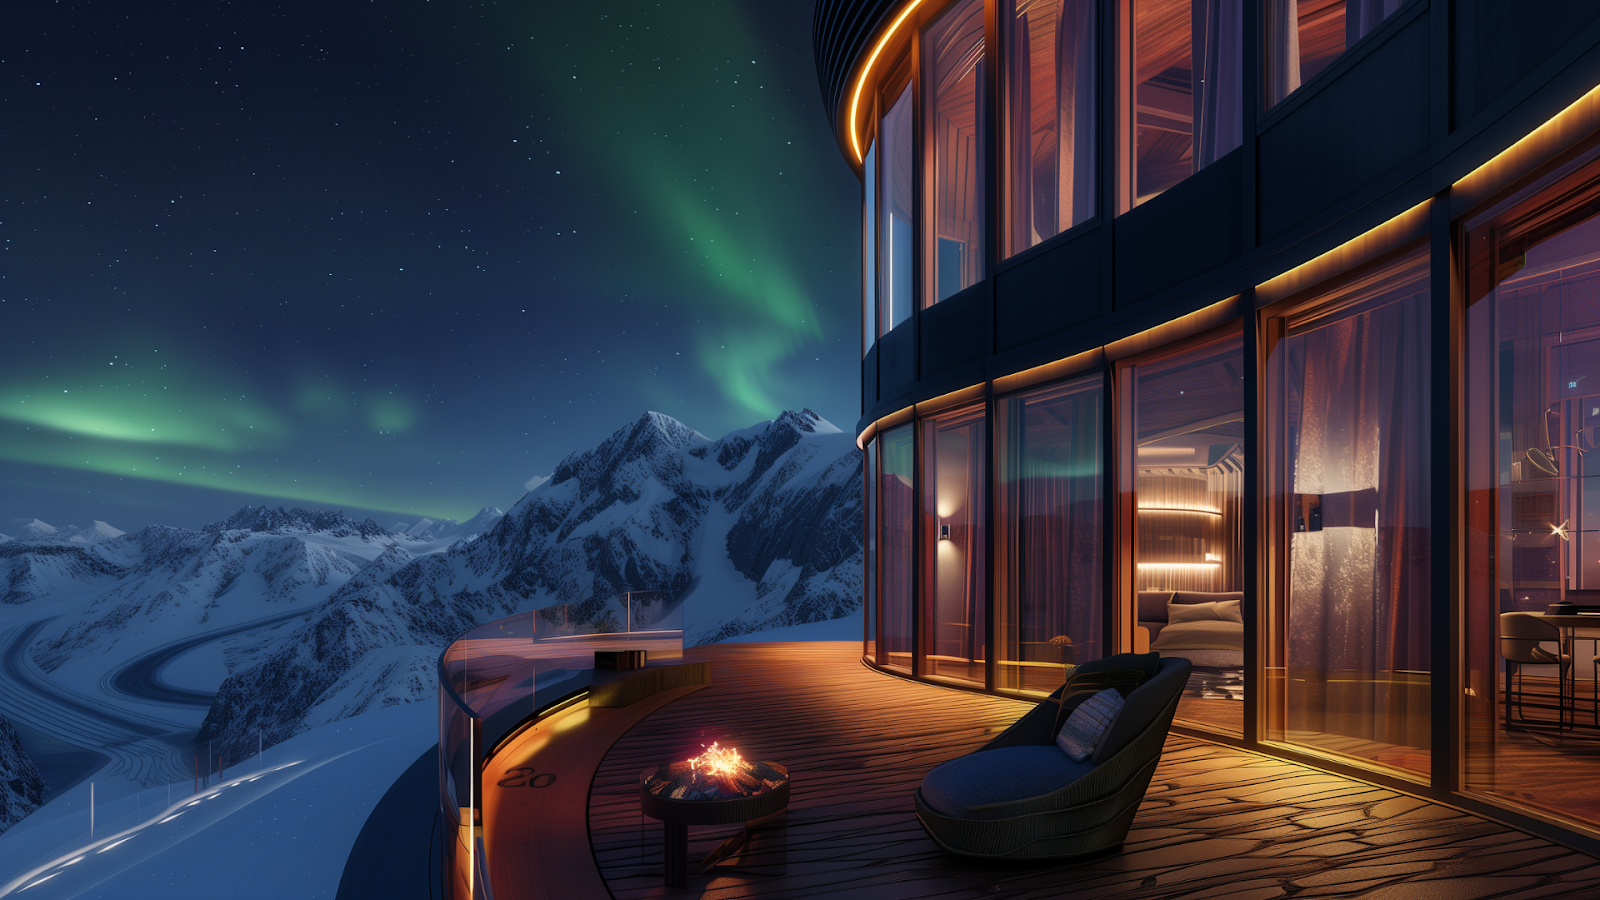 Observatory deck of a luxury retreat with a view of snow-capped mountains under the northern lights.